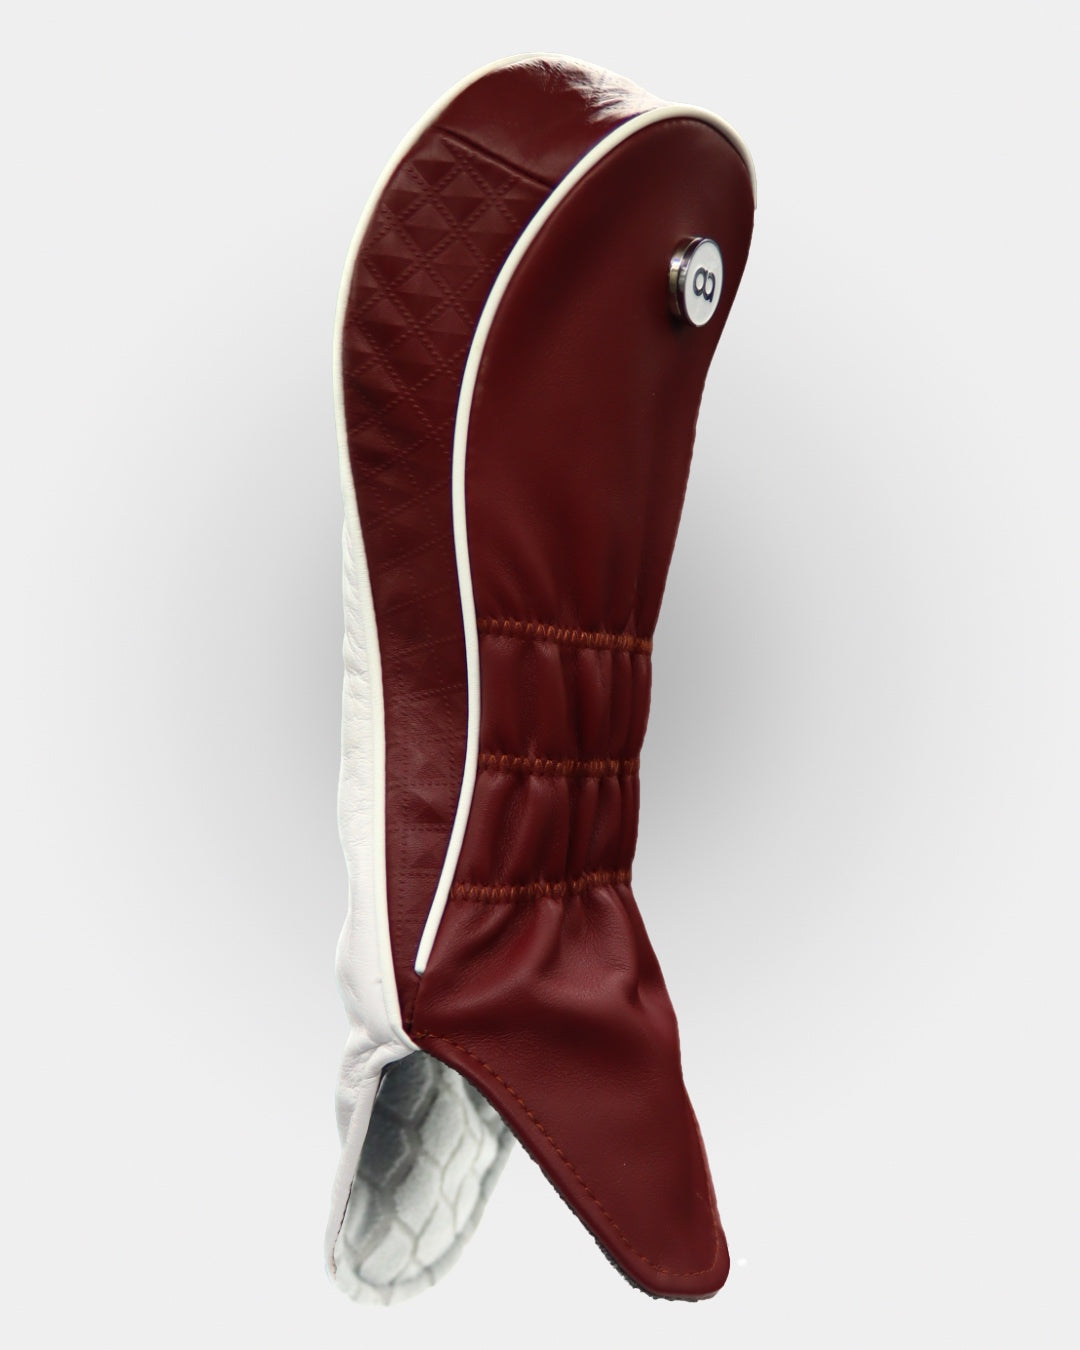 White and burgundy leather driver headcover by David Alexander